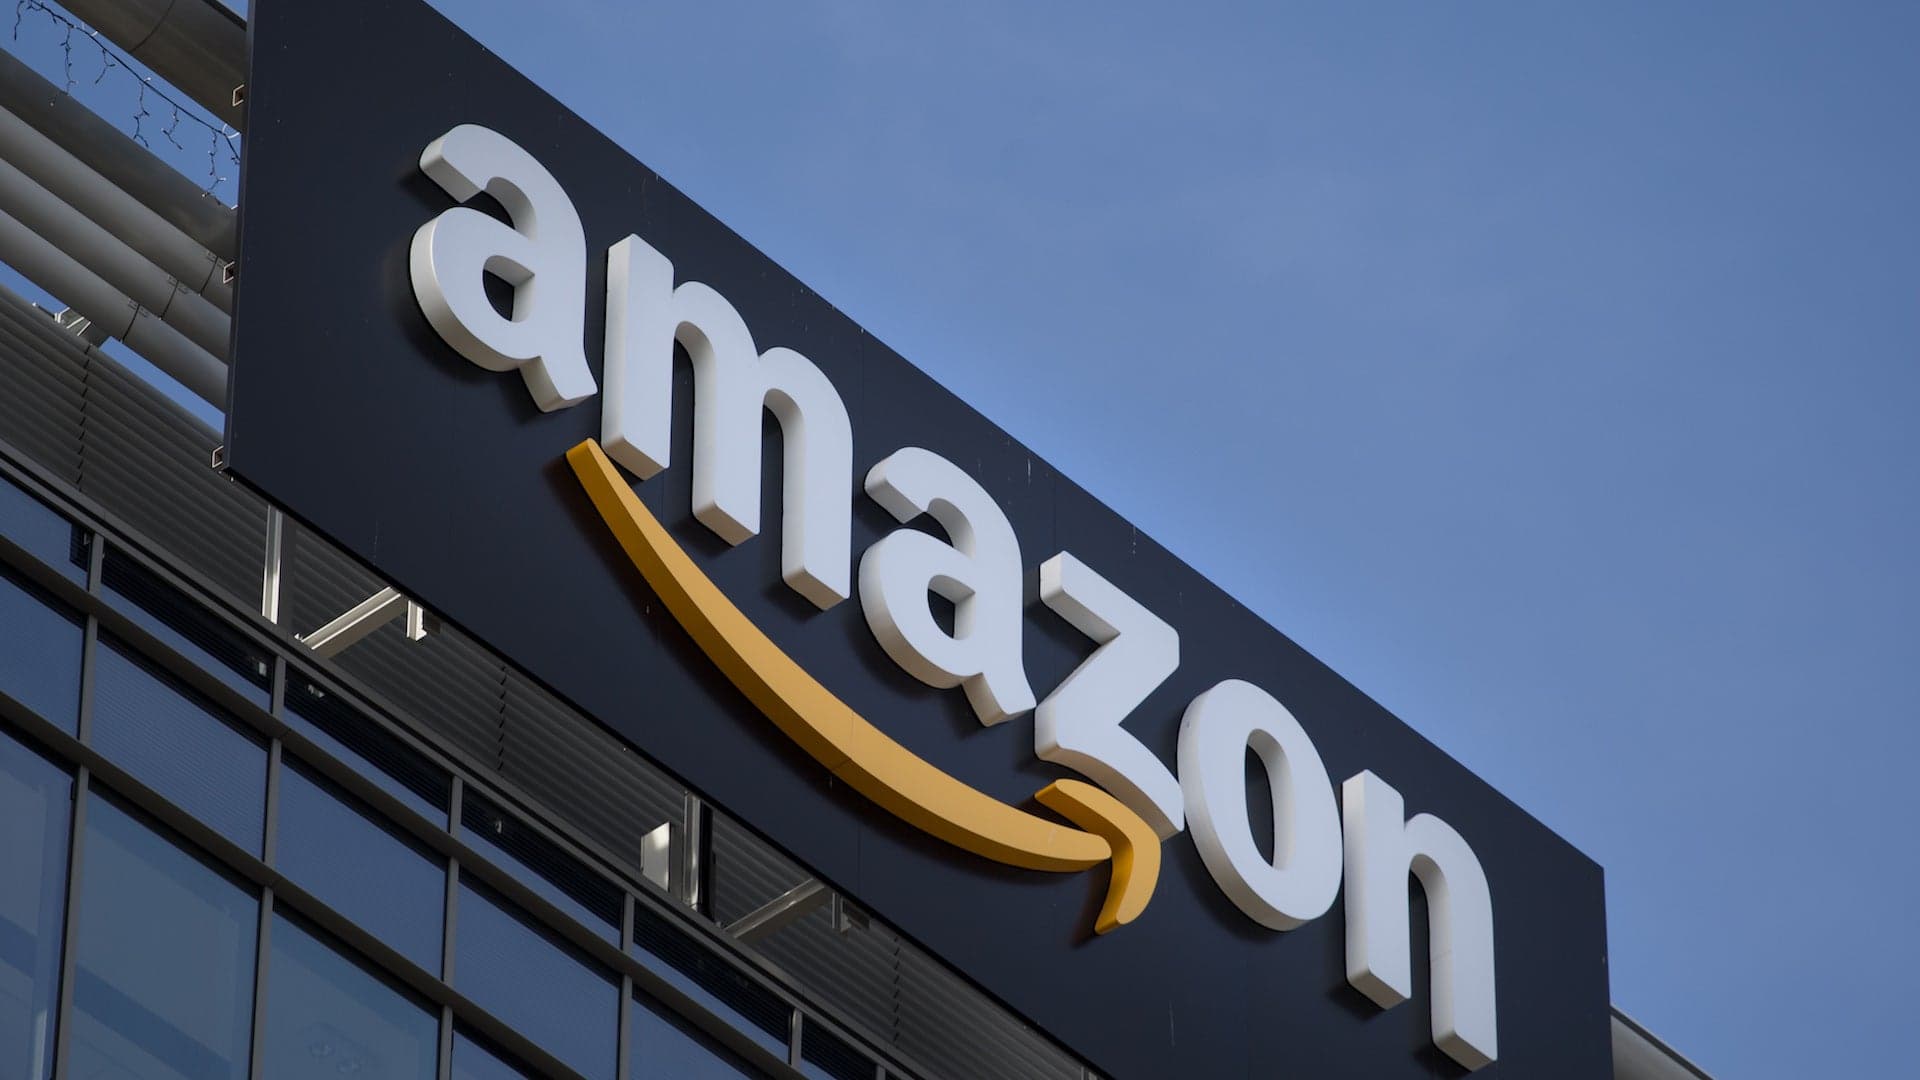 Amazon Patents Aerial Fulfillment Centers for Improved Drone Delivery